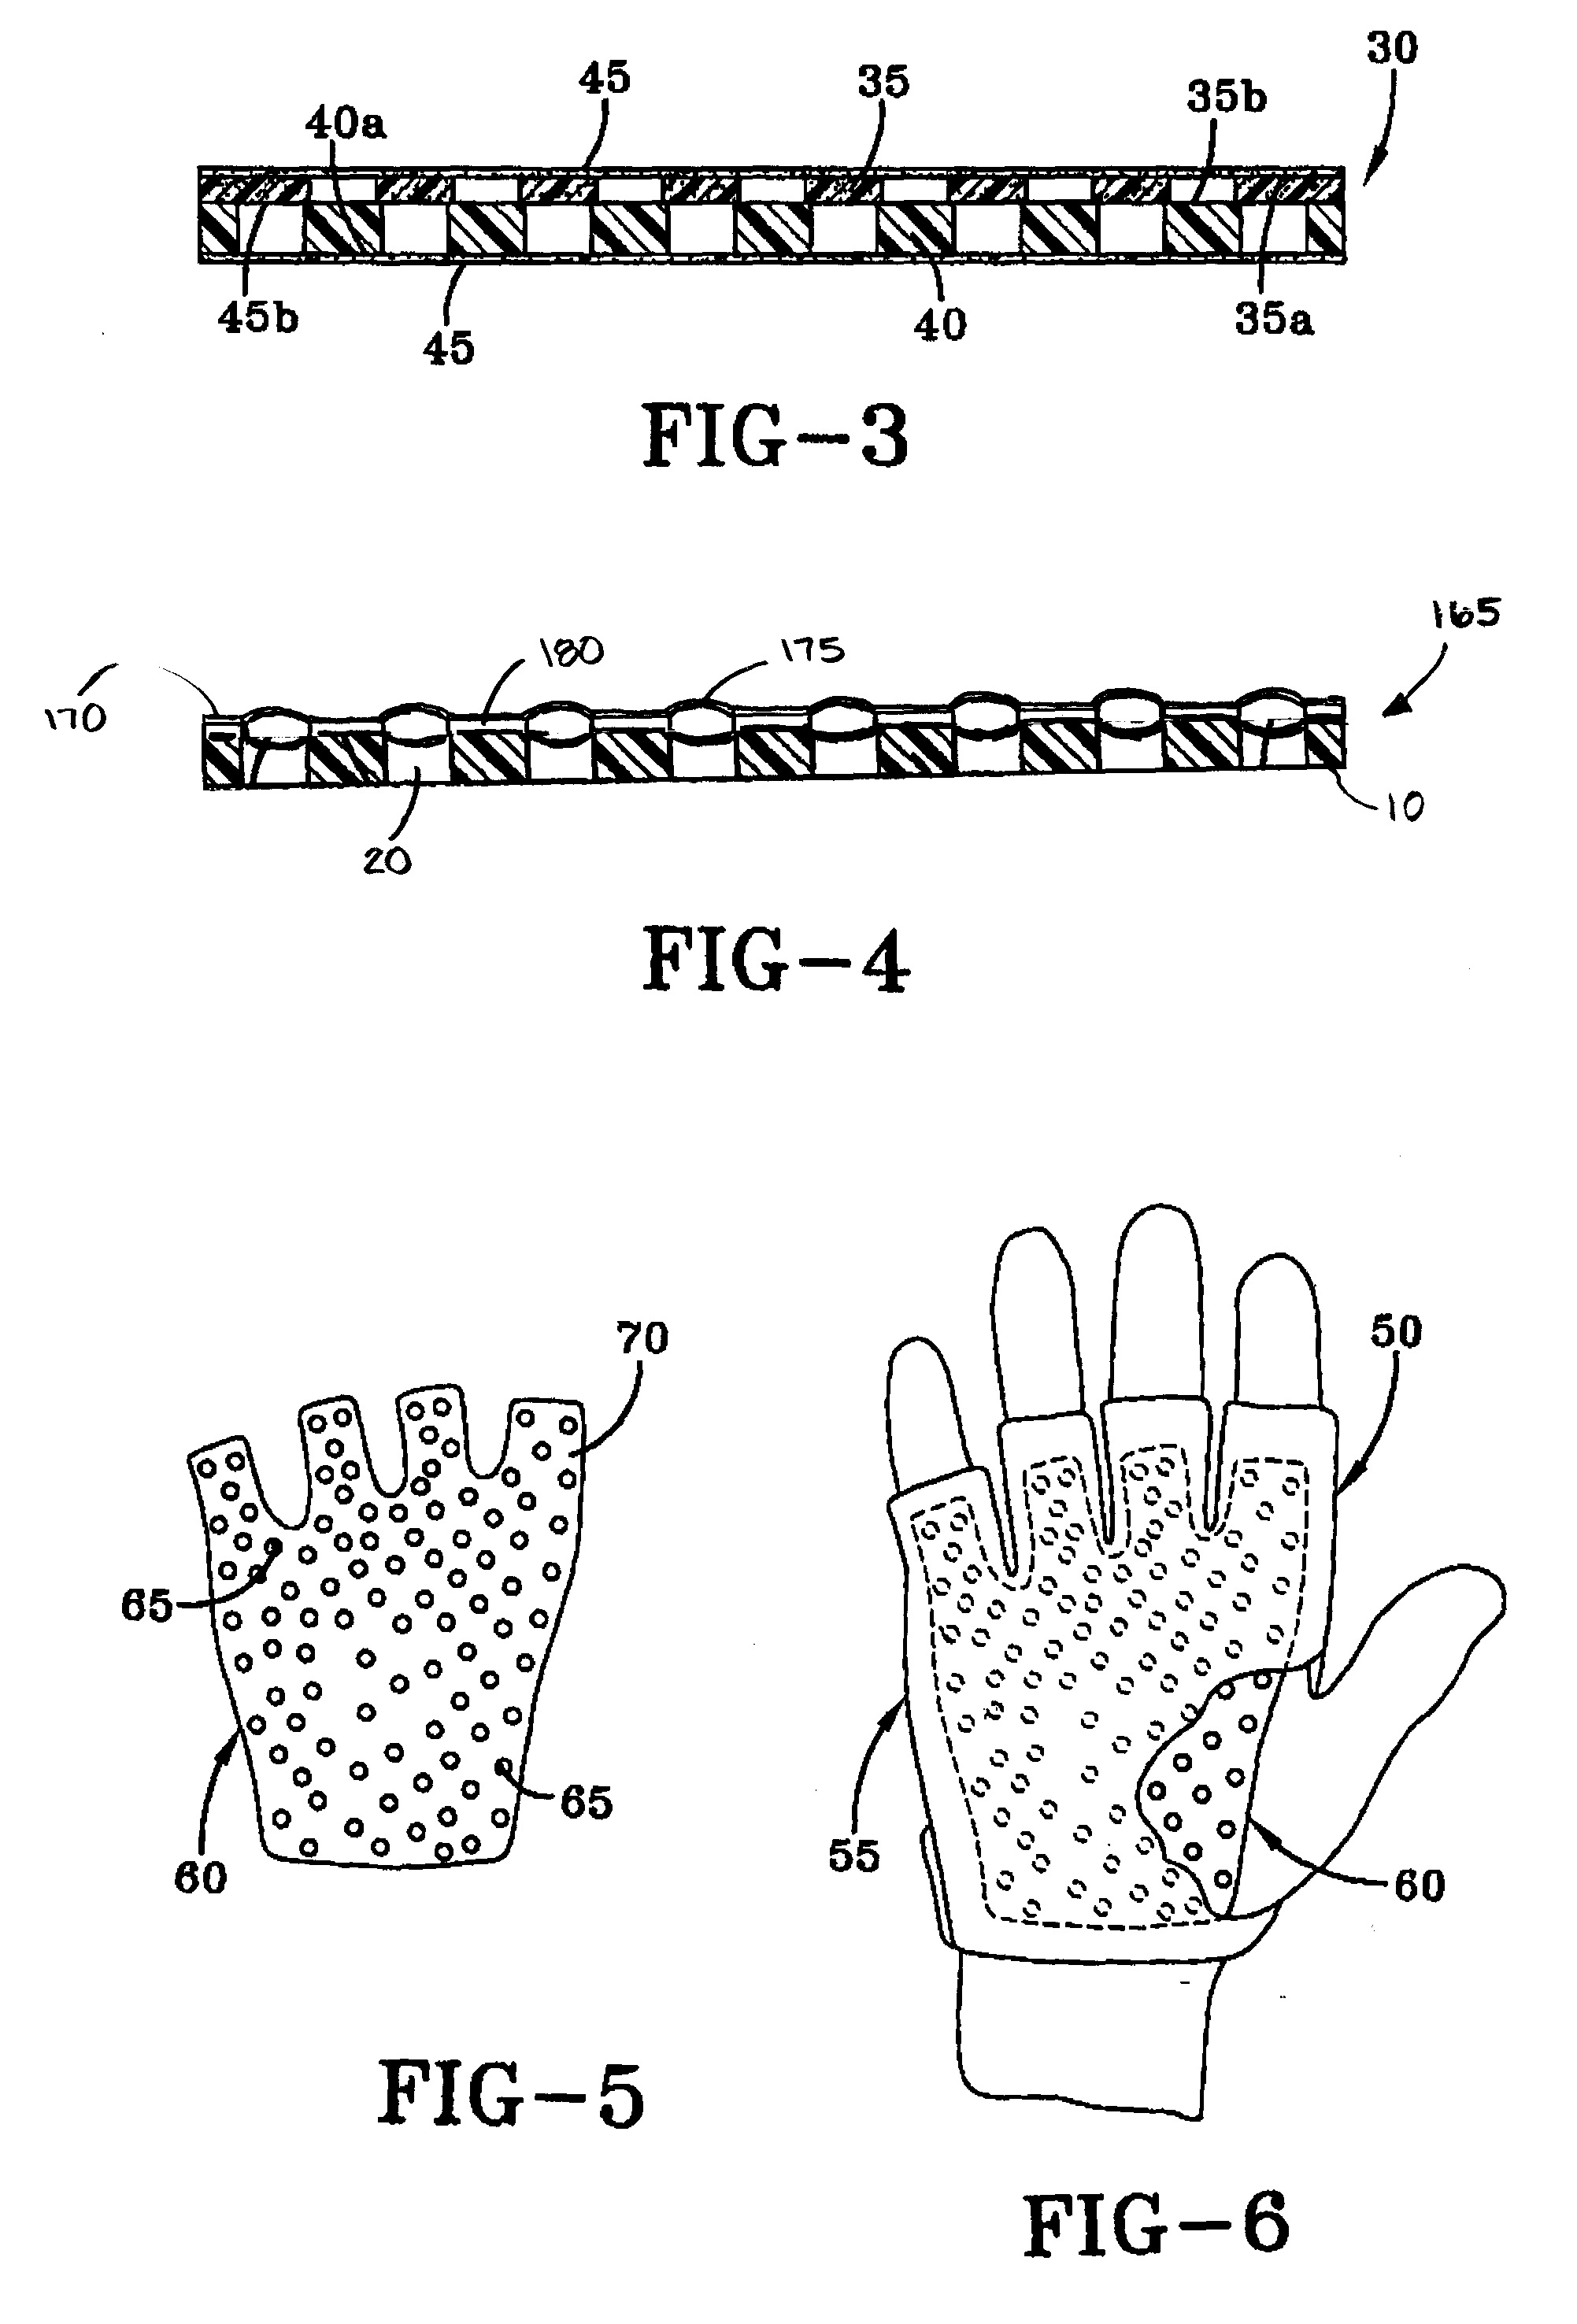 Impact and/or vibration absorbent material and protective articles making use thereof